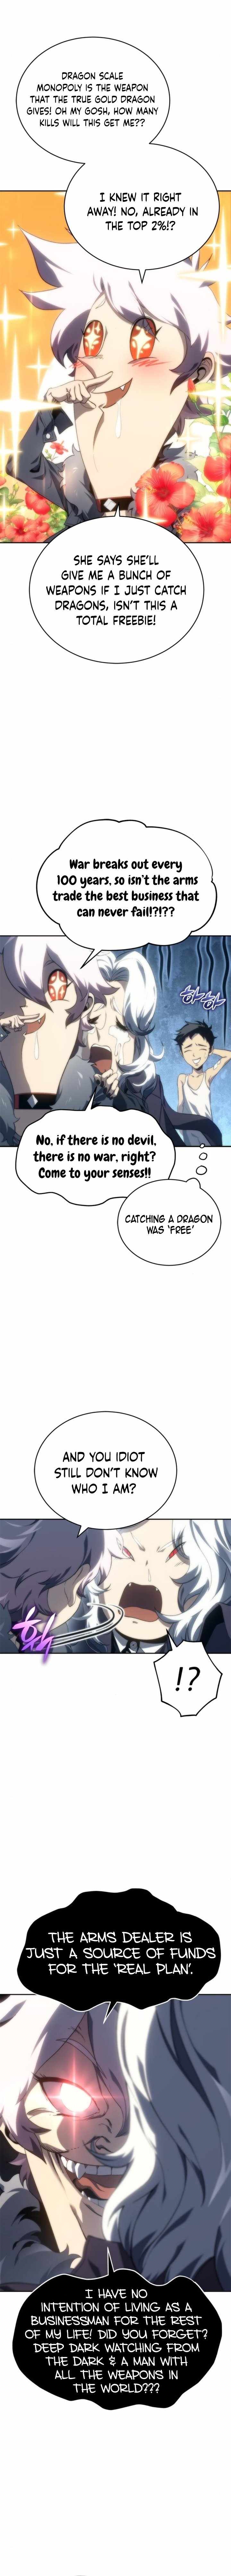 Why I Quit Being the Demon King Chapter 9 3